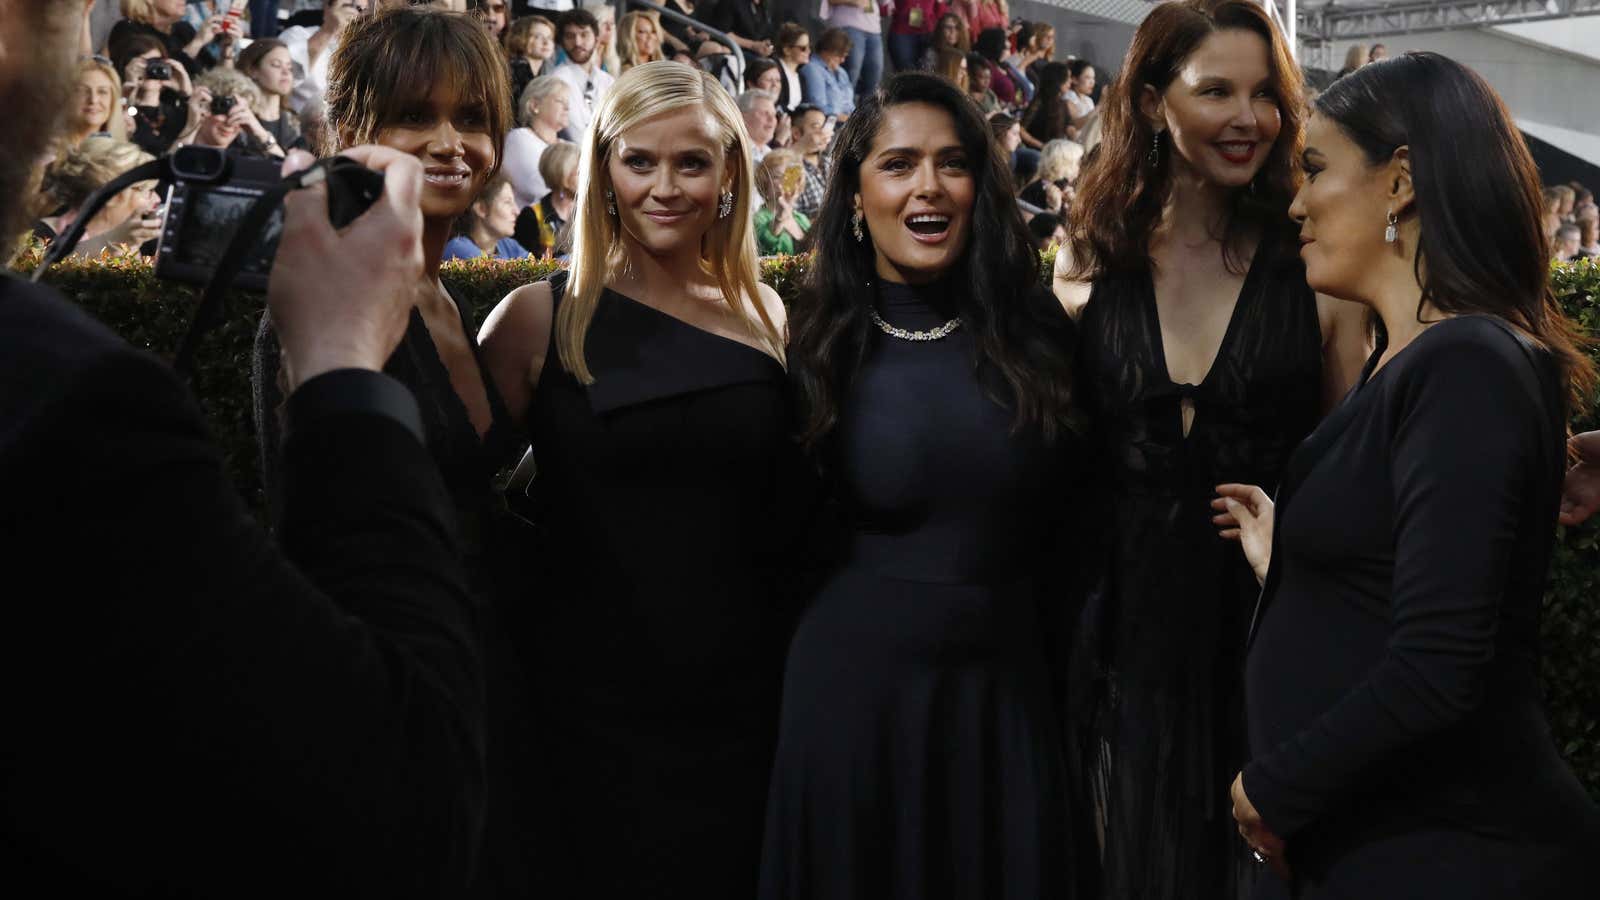 Actresses Halle Berry, Reese Witherspoon, Salma Hayek, Ashley Judd, and Eva Longoria dressed for the Golden Globes “blackout.”